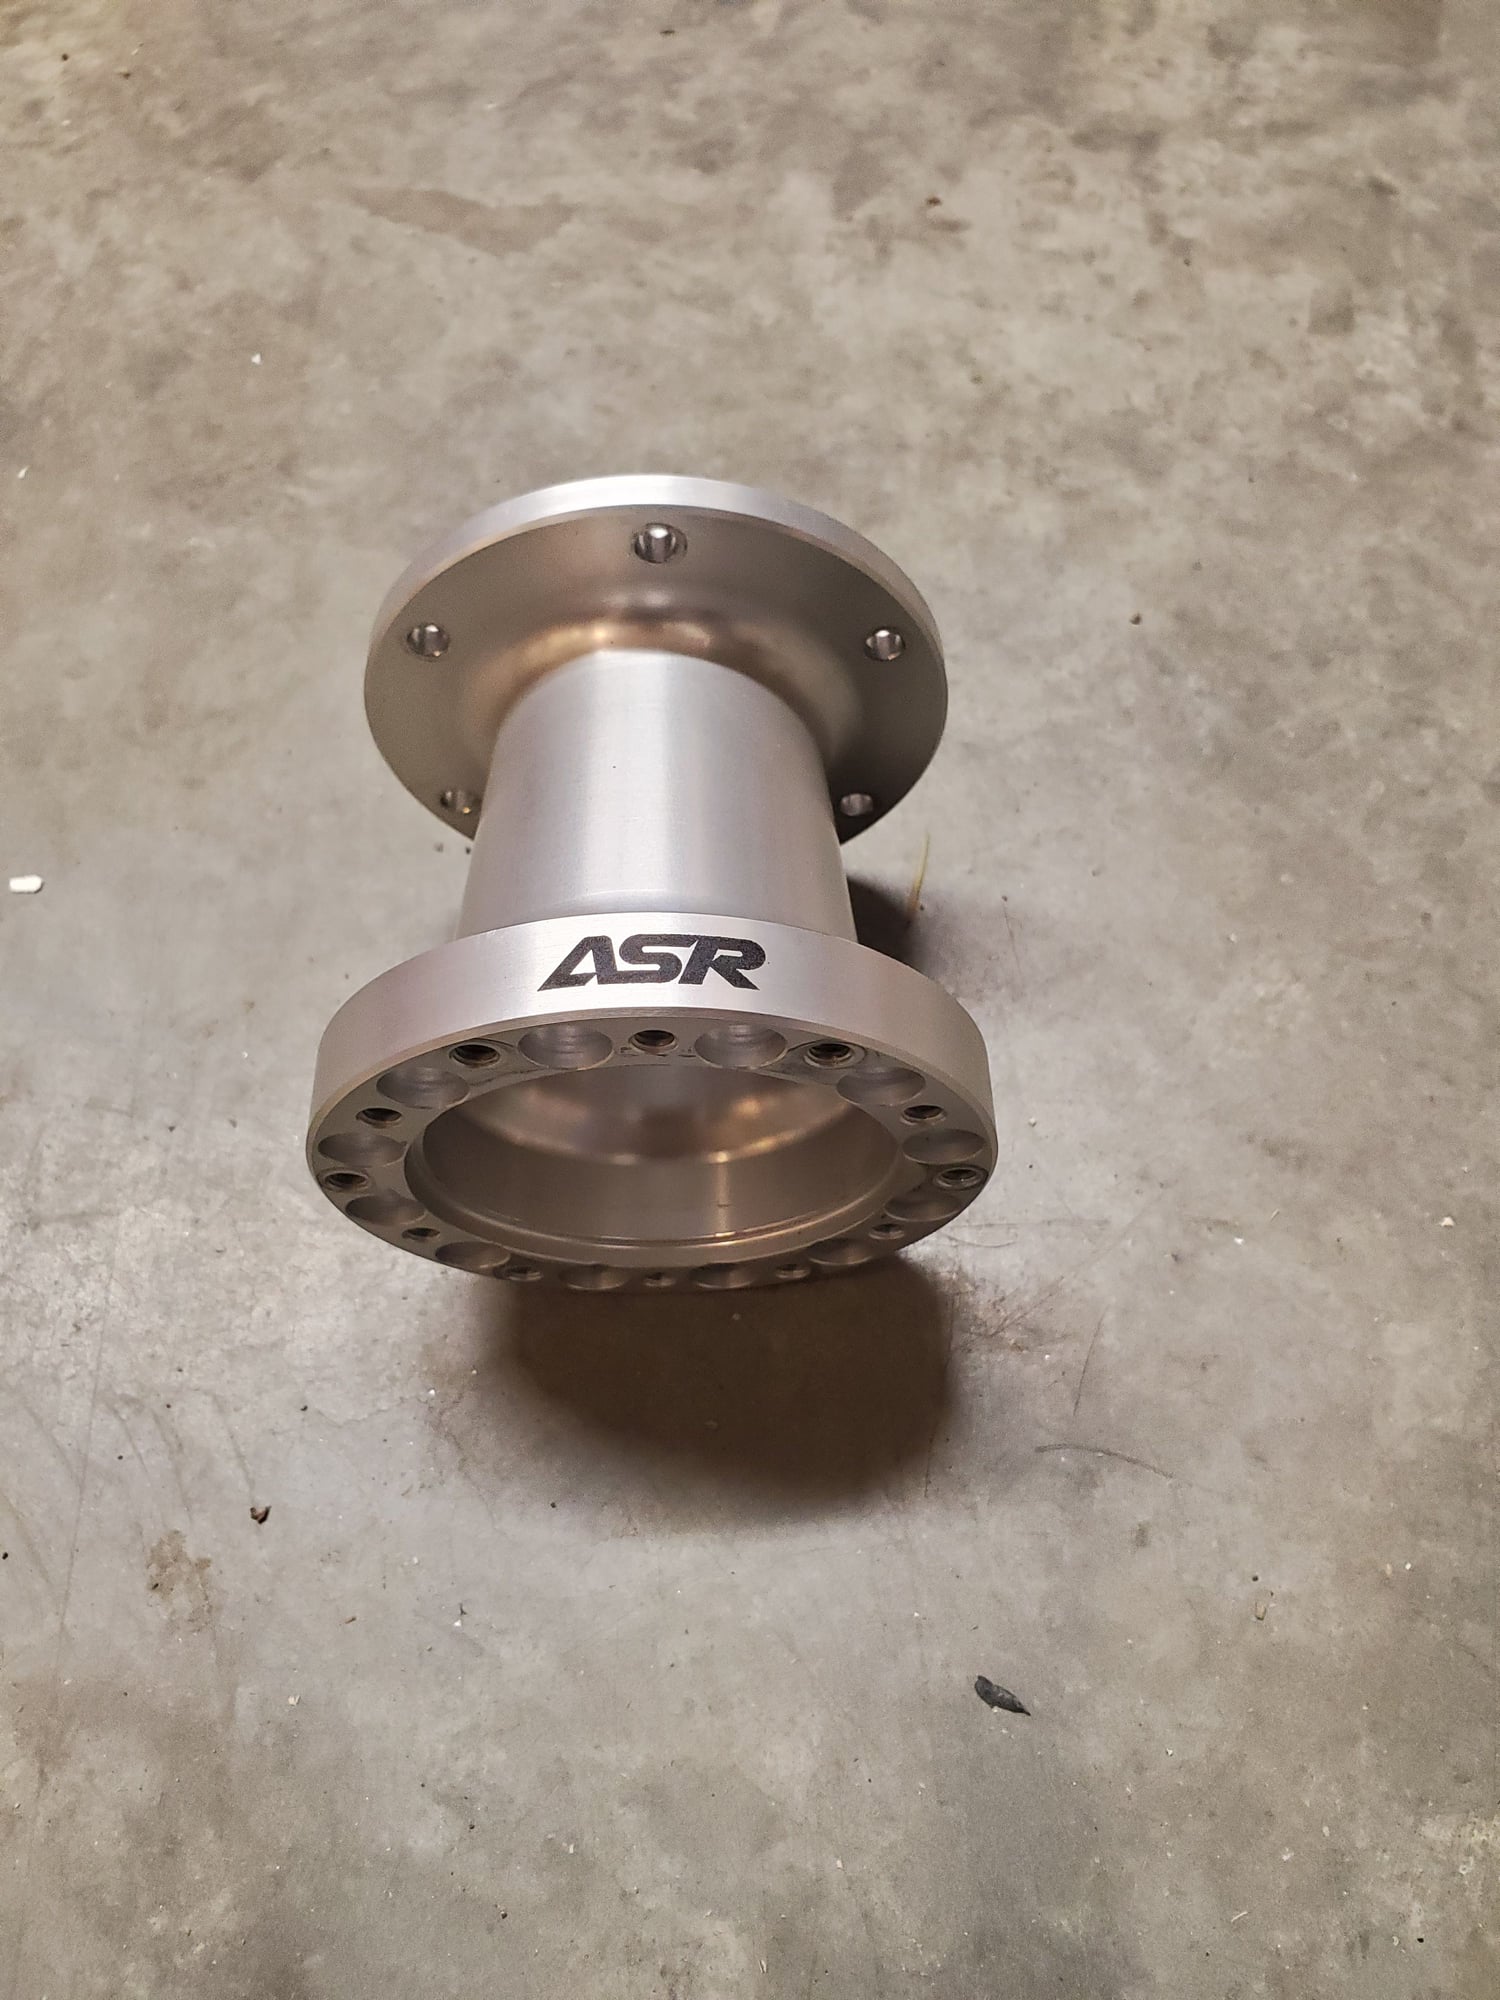 Interior/Upholstery - ASR steering wheel hub spacer - Used - All Years Any Make All Models - Kamps, BC V2E1M4, Canada